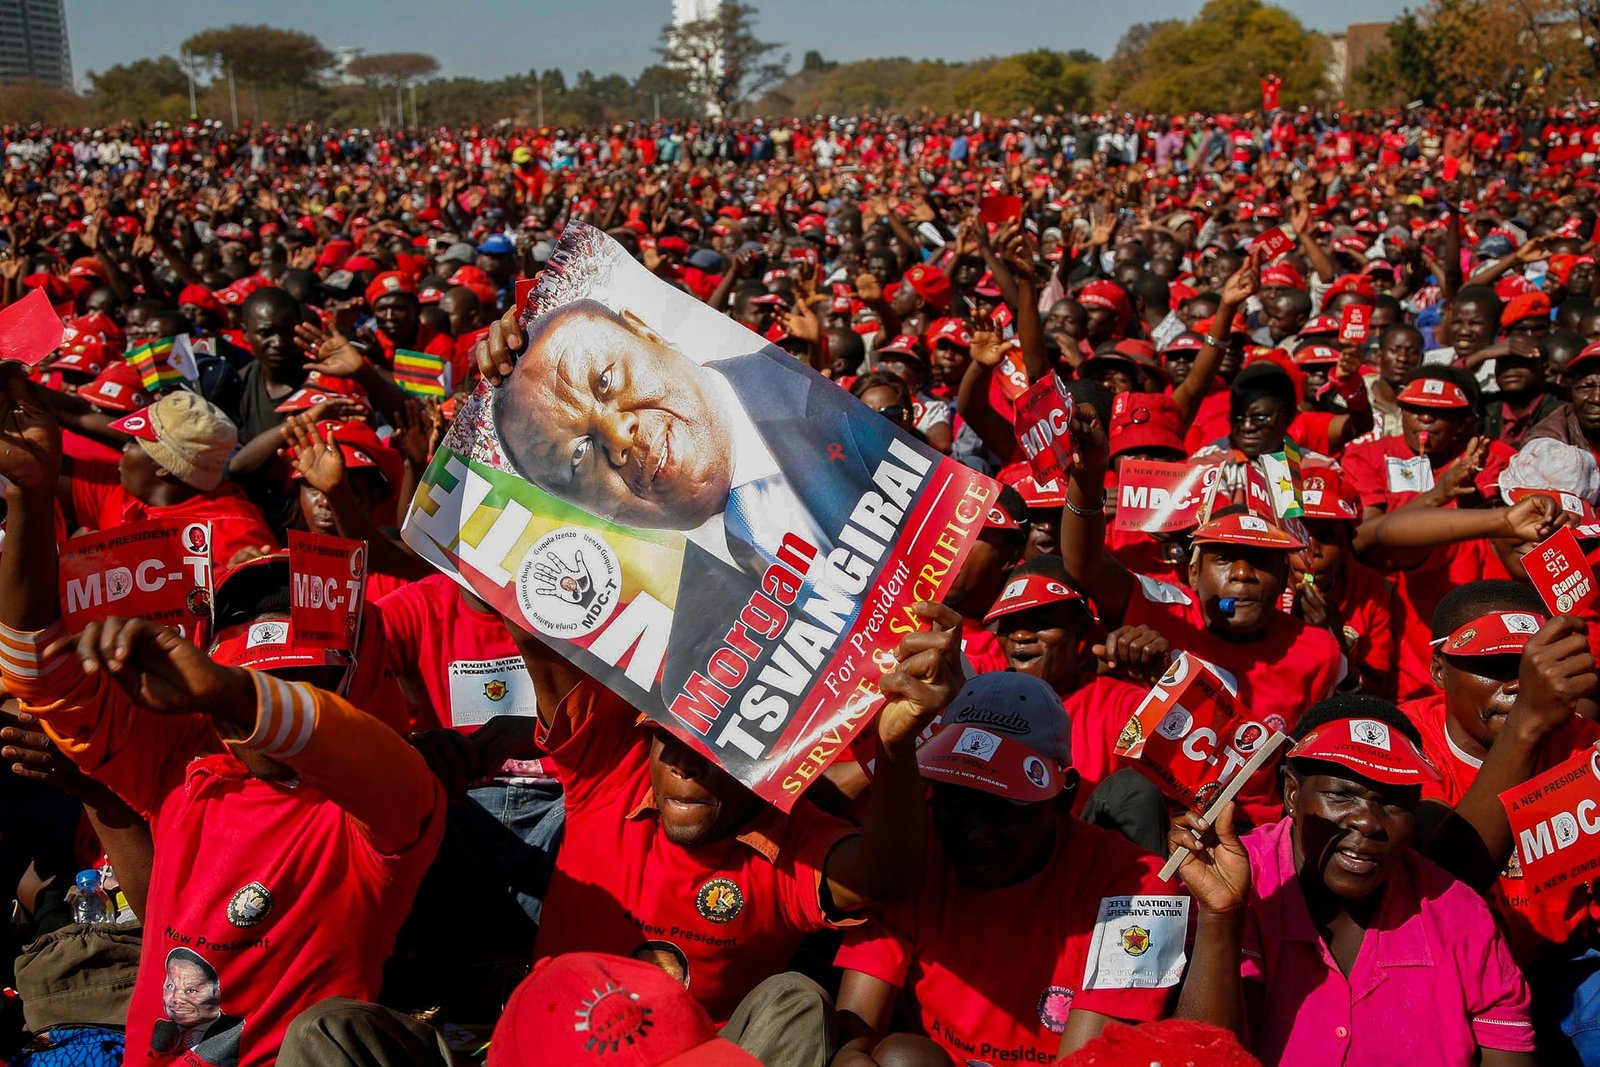 MDC supporters at an election rally in July 2013 in Harare ahead of presidential elections at the end of the month Photograph Aaron UfumeliEPA | Report Focus News